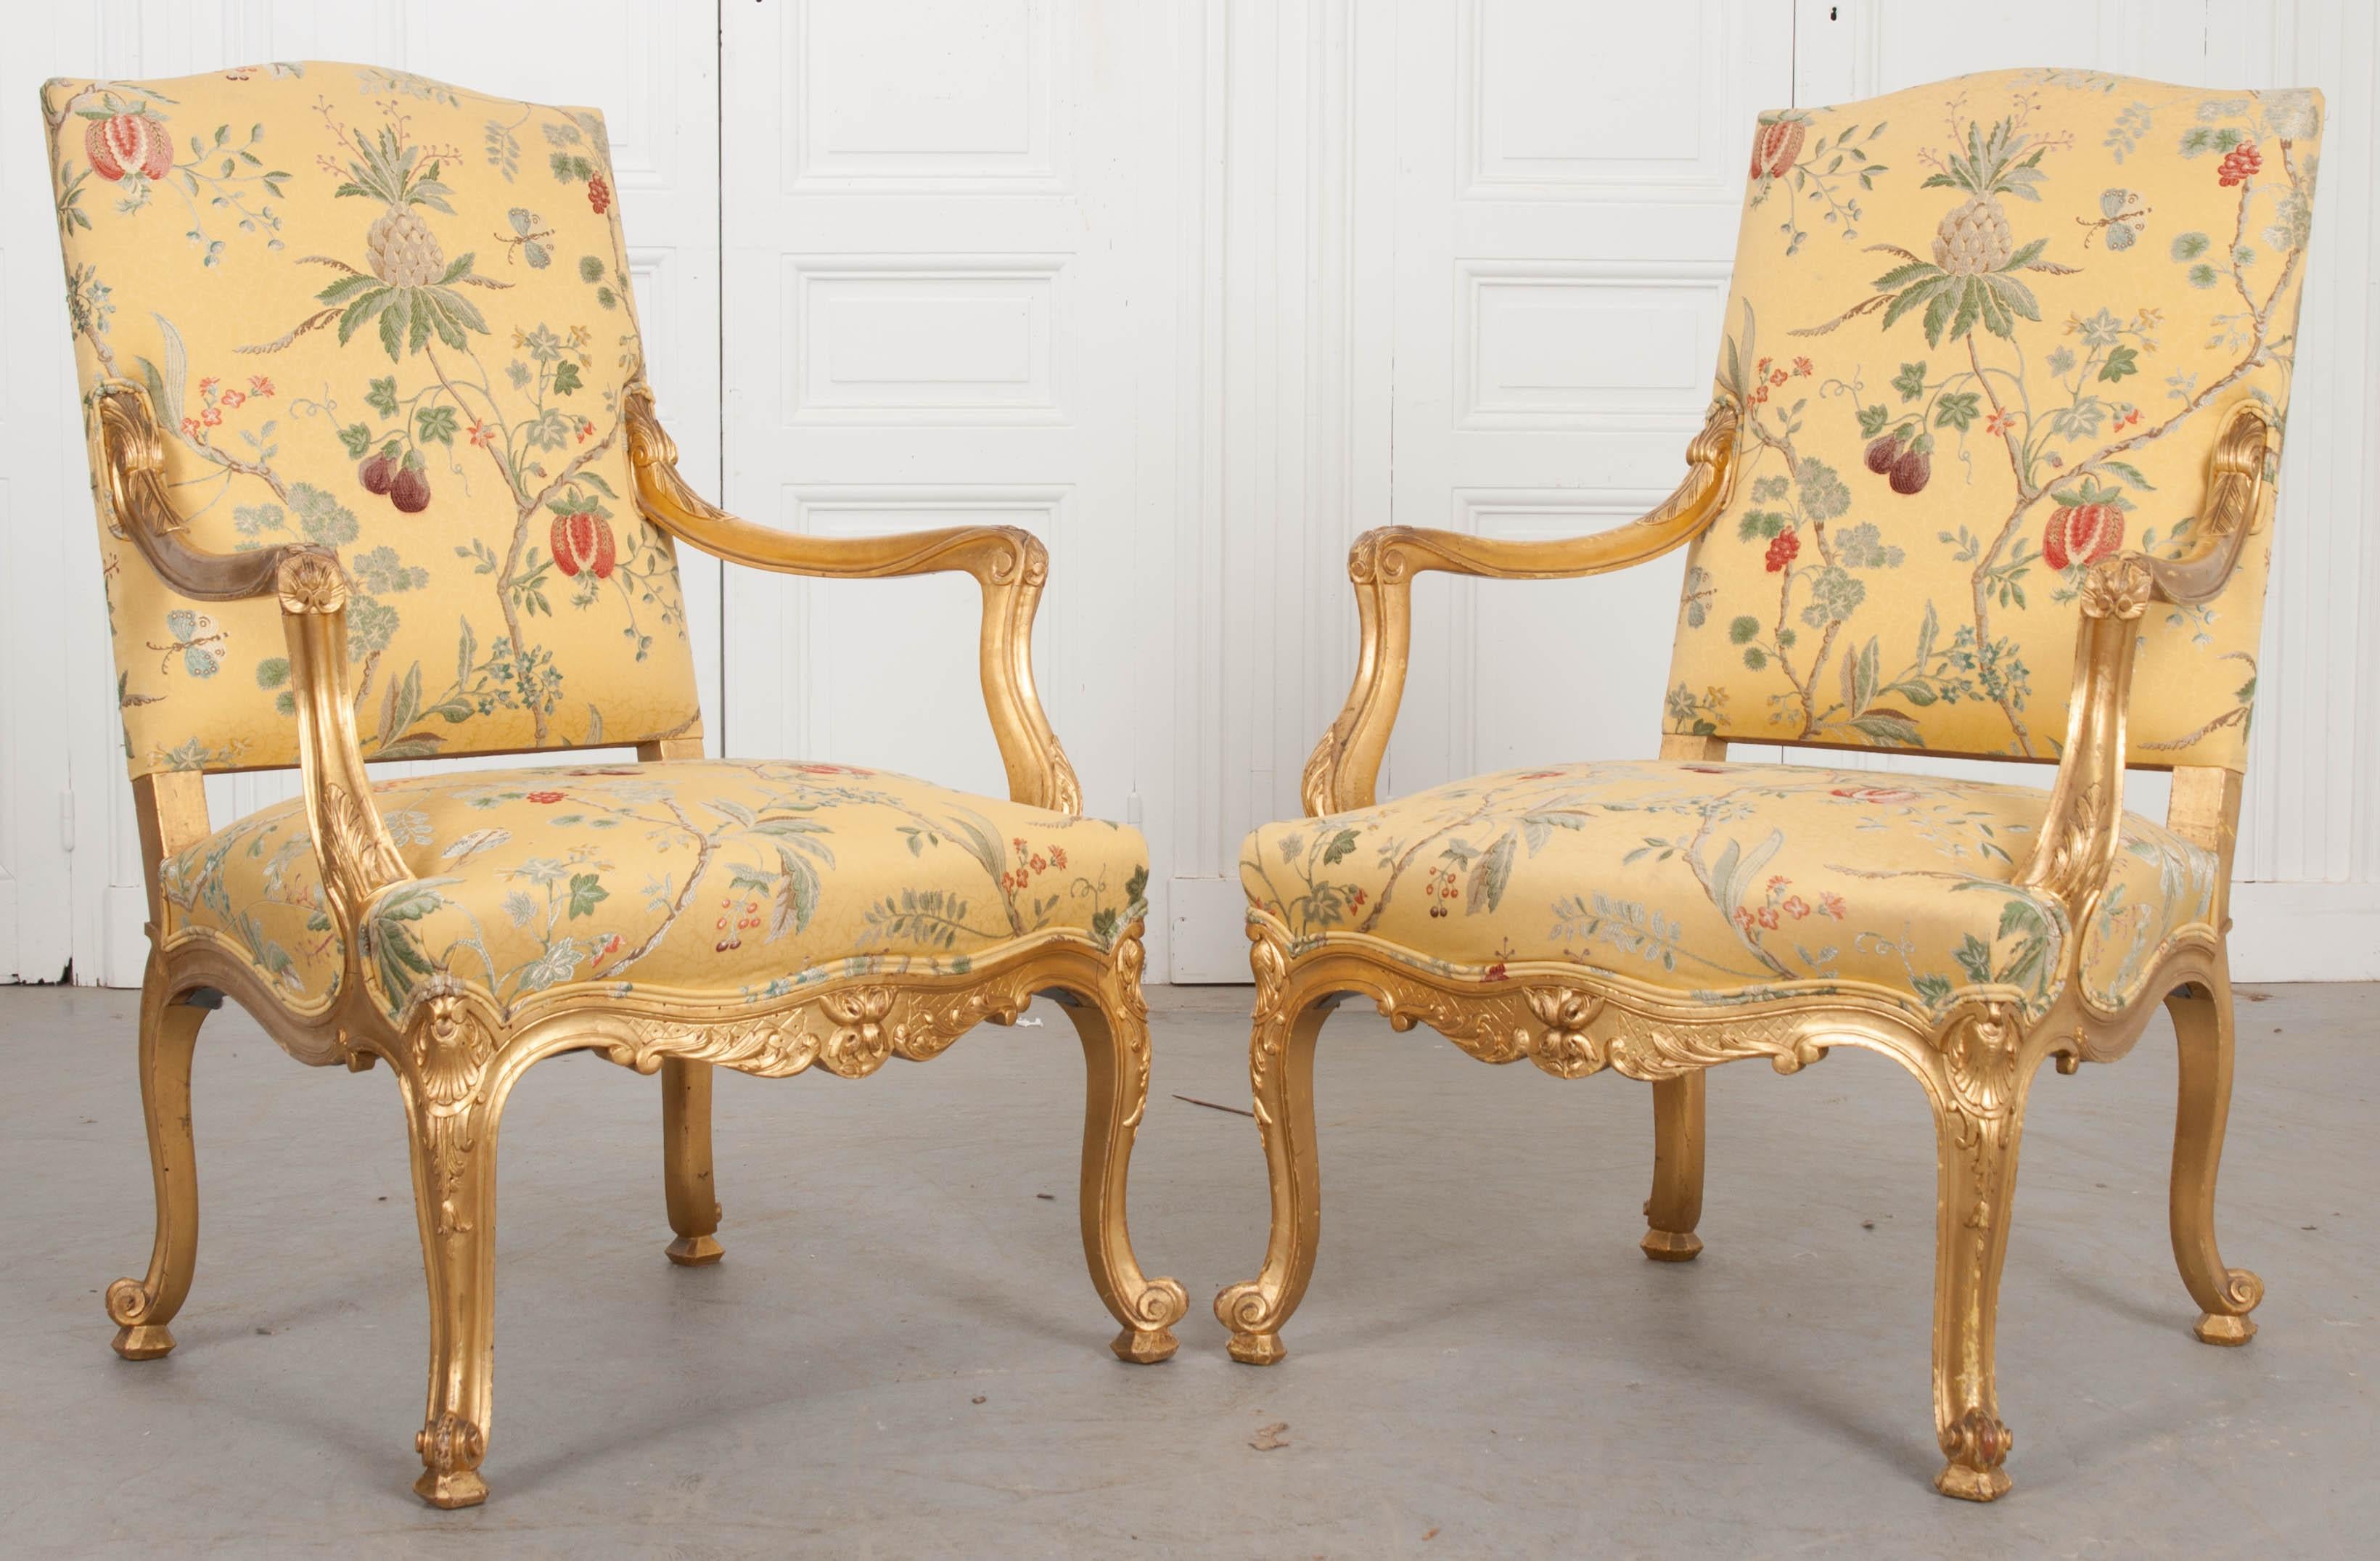 A brilliant pair of gold gilt fauteuils, made in France towards the beginning of the 19th century. The pair have been more recently upholstered in a silk fabric depicting fruiting branches. These Louis XV armchairs have a carved frame that is